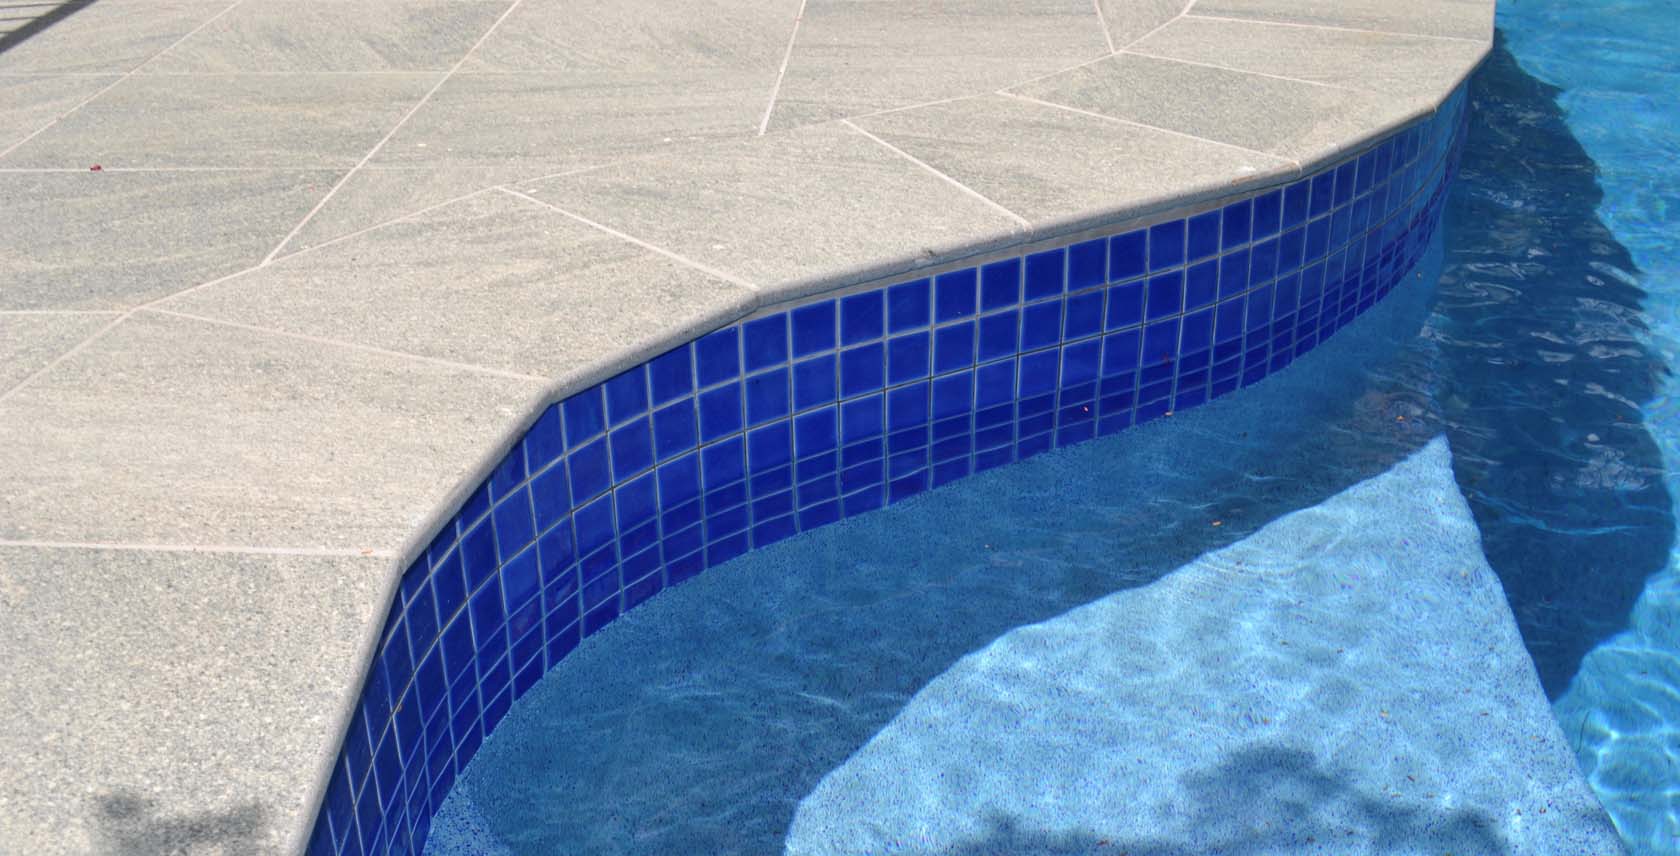 Cosmos Granito Porcelain Bullnose pool coping and surrounds with Coral Sea Waterline tiles